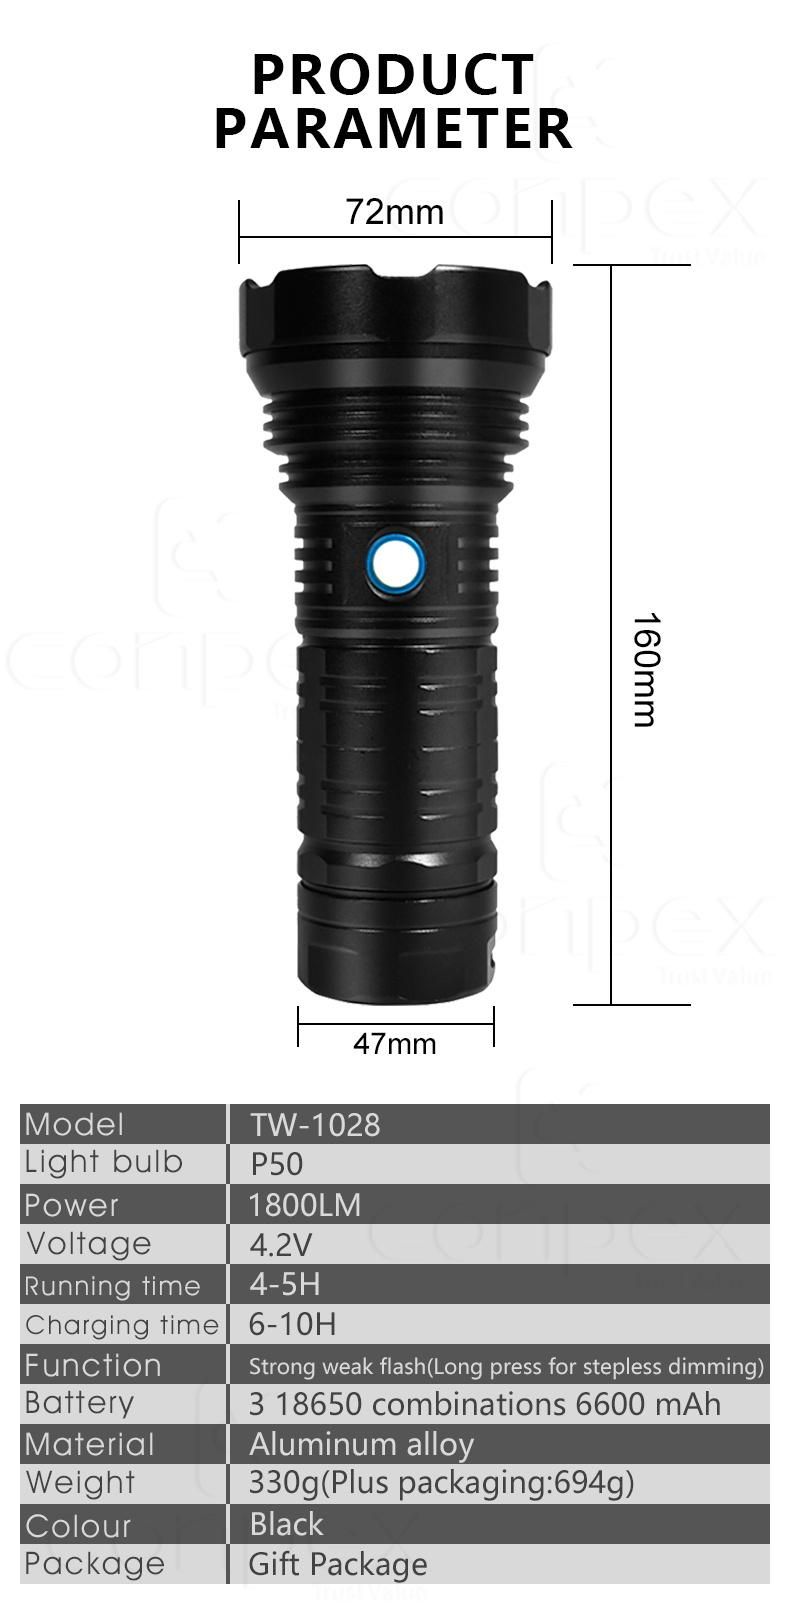 Conpex Multi-Functional Outdoor Lighting USB Rechargeable 18650 Battery Power LED Flashlight Tw 1028